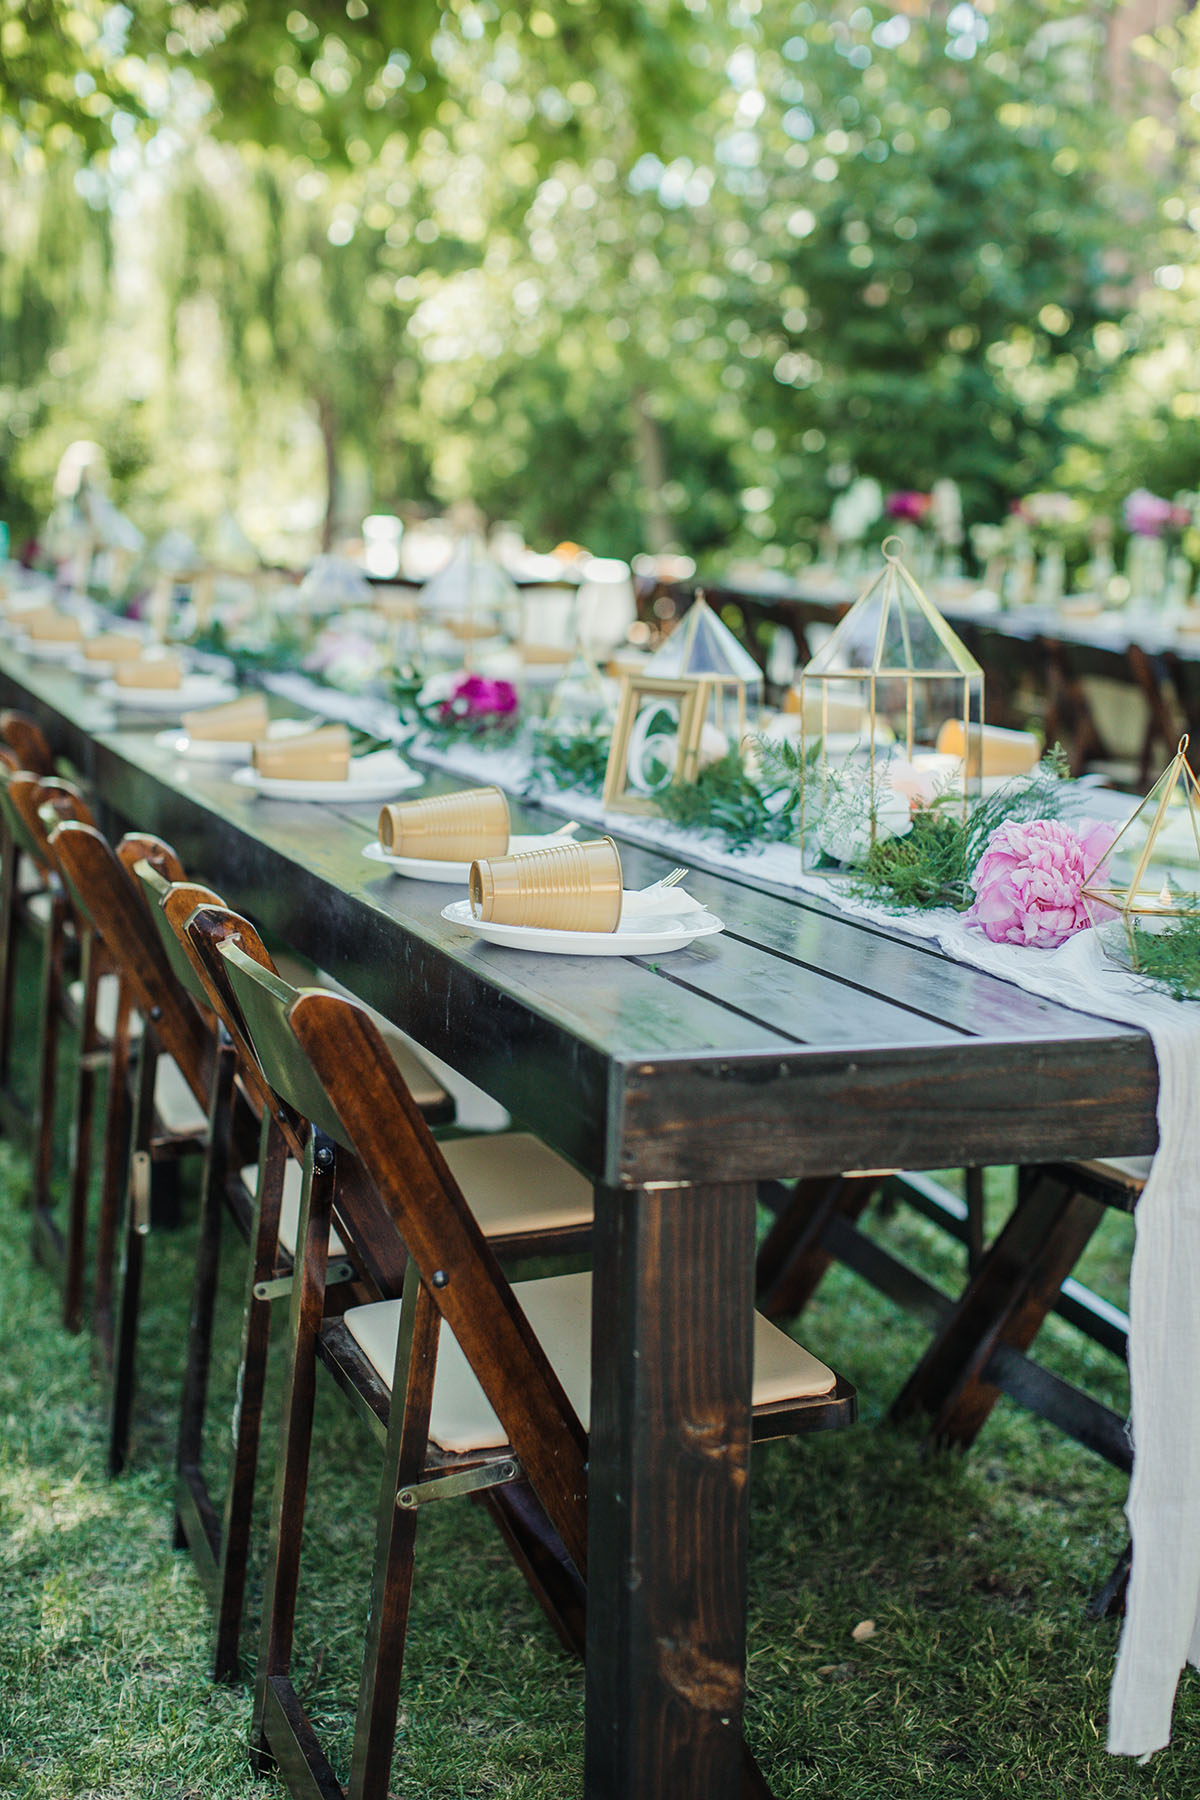 Eclectic bohemian mountain fairytale wedding table setting outside outdoors nature green